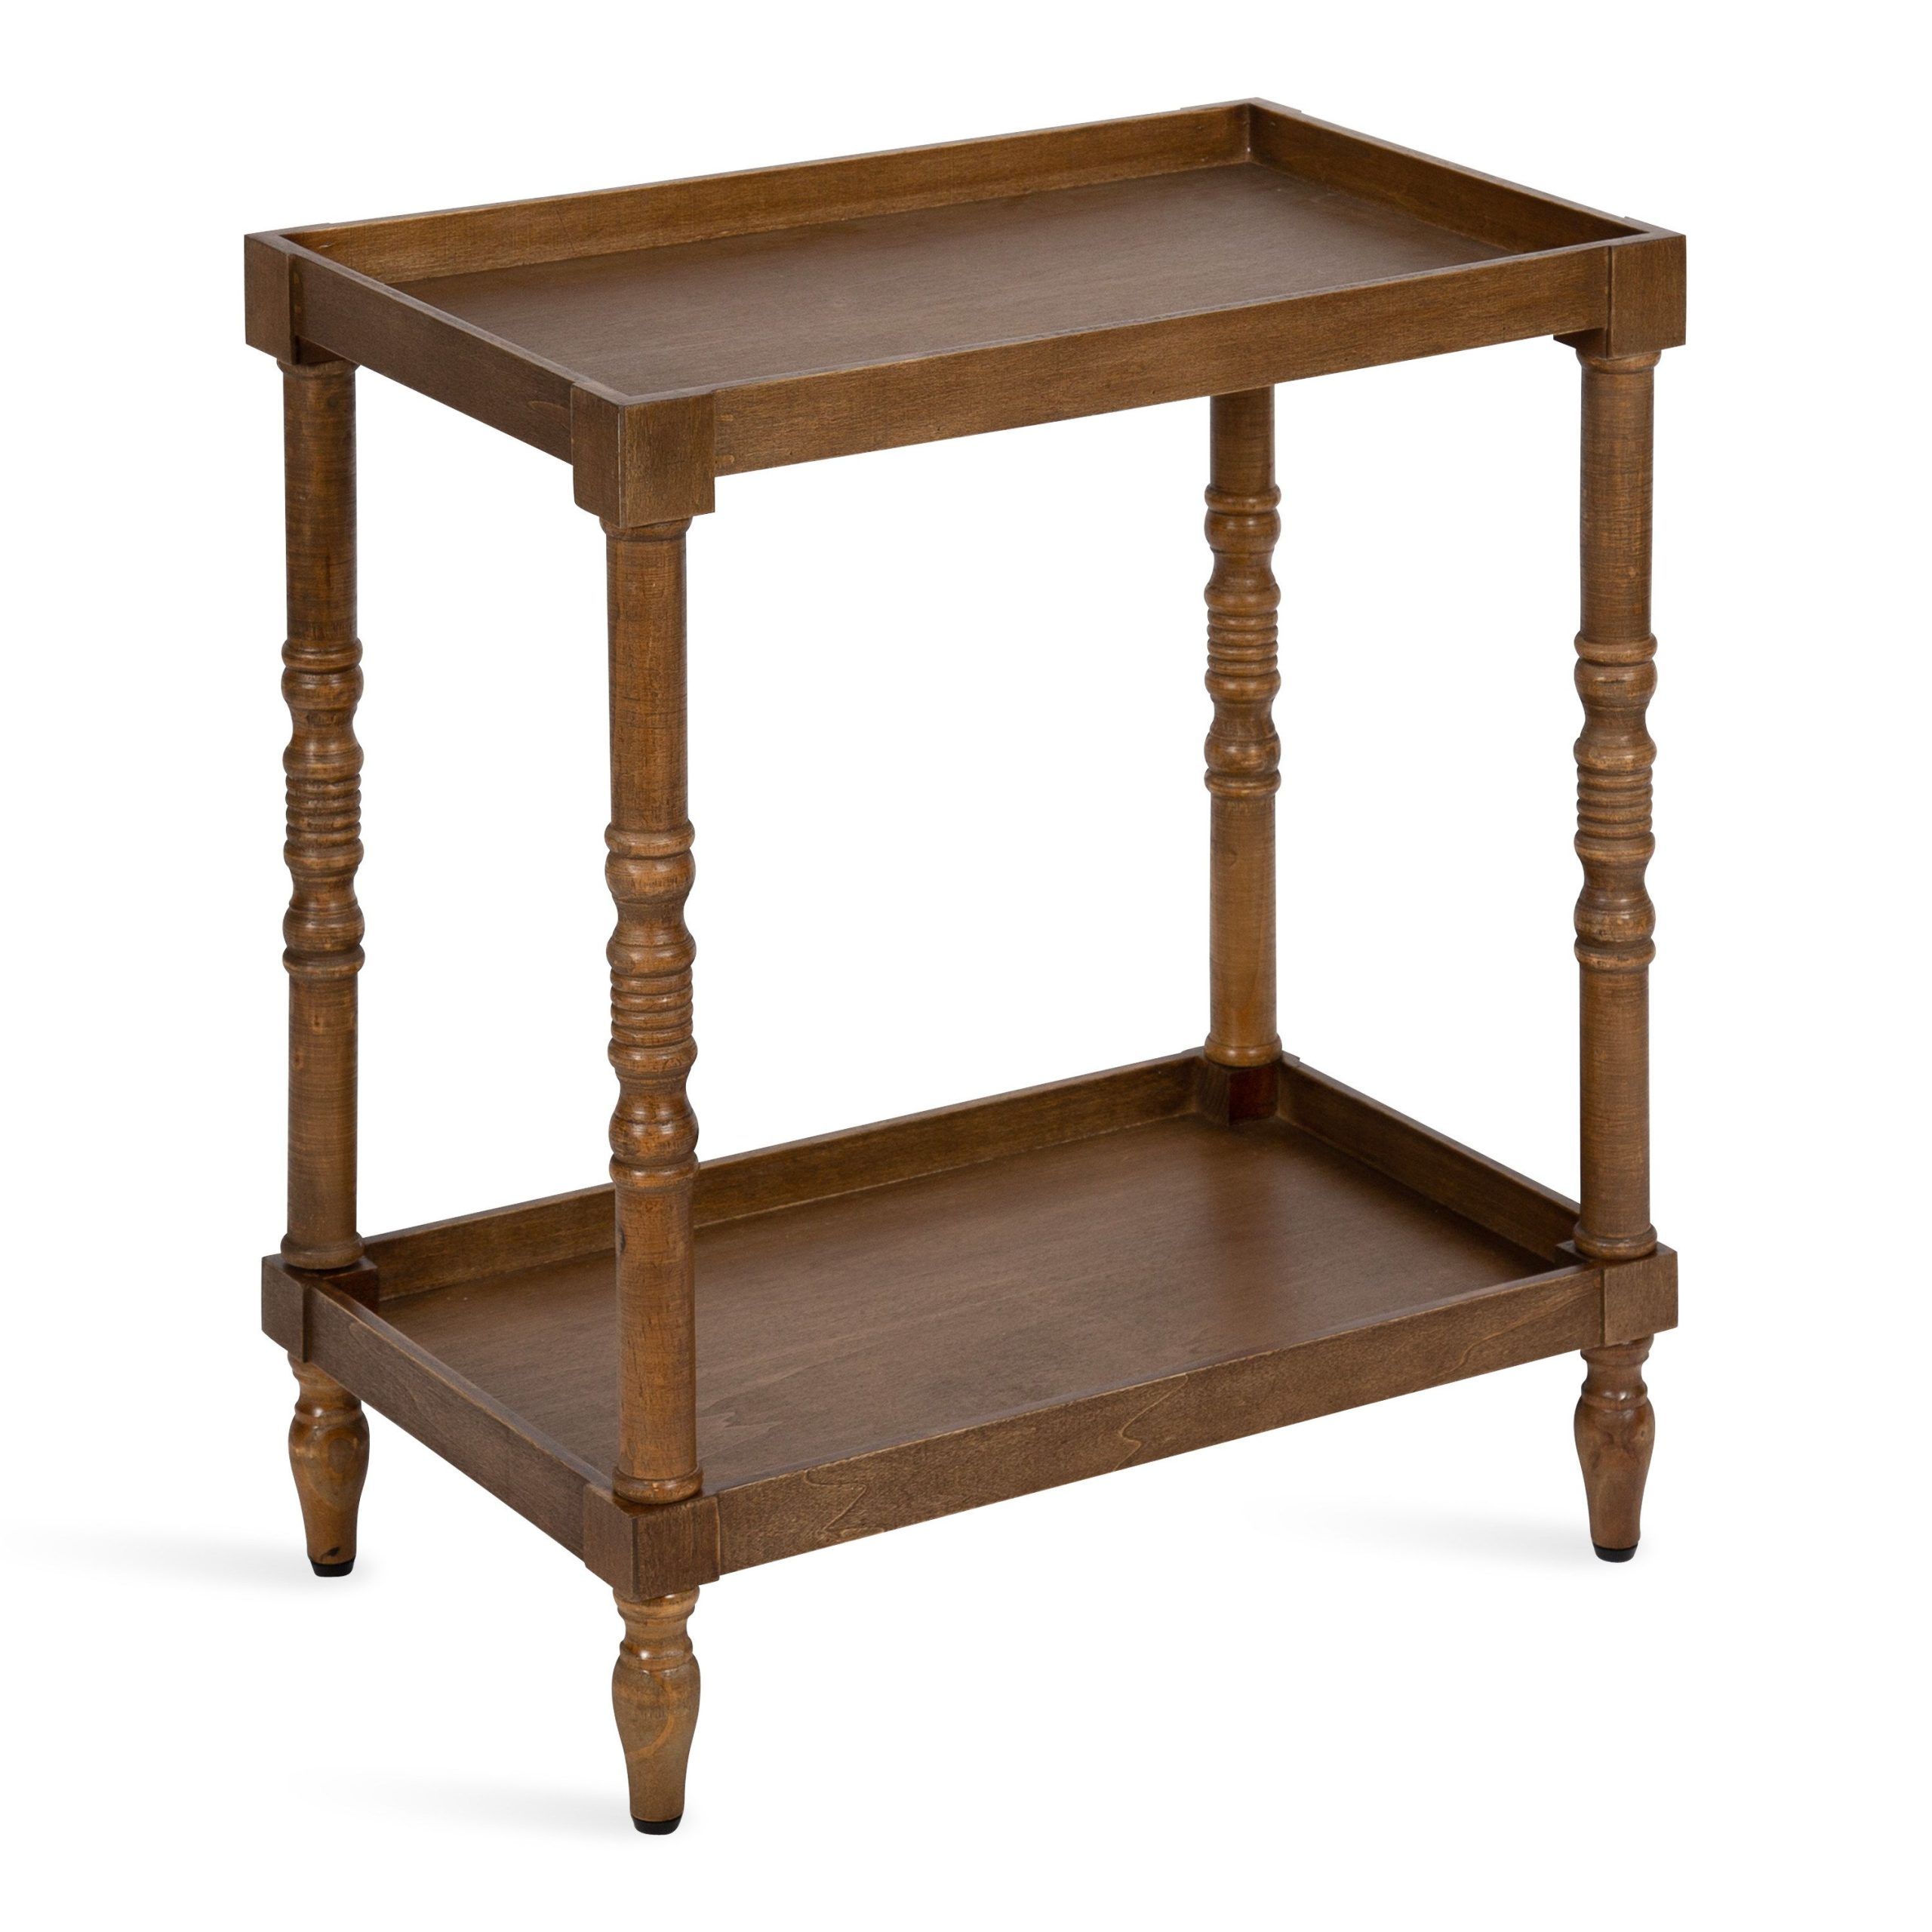 Kate And Laurel Bellport Farmhouse Side Table, 22 X 14 X 26, Rustic Within Kate And Laurel Bellport Farmhouse Drink Tables (View 11 of 15)